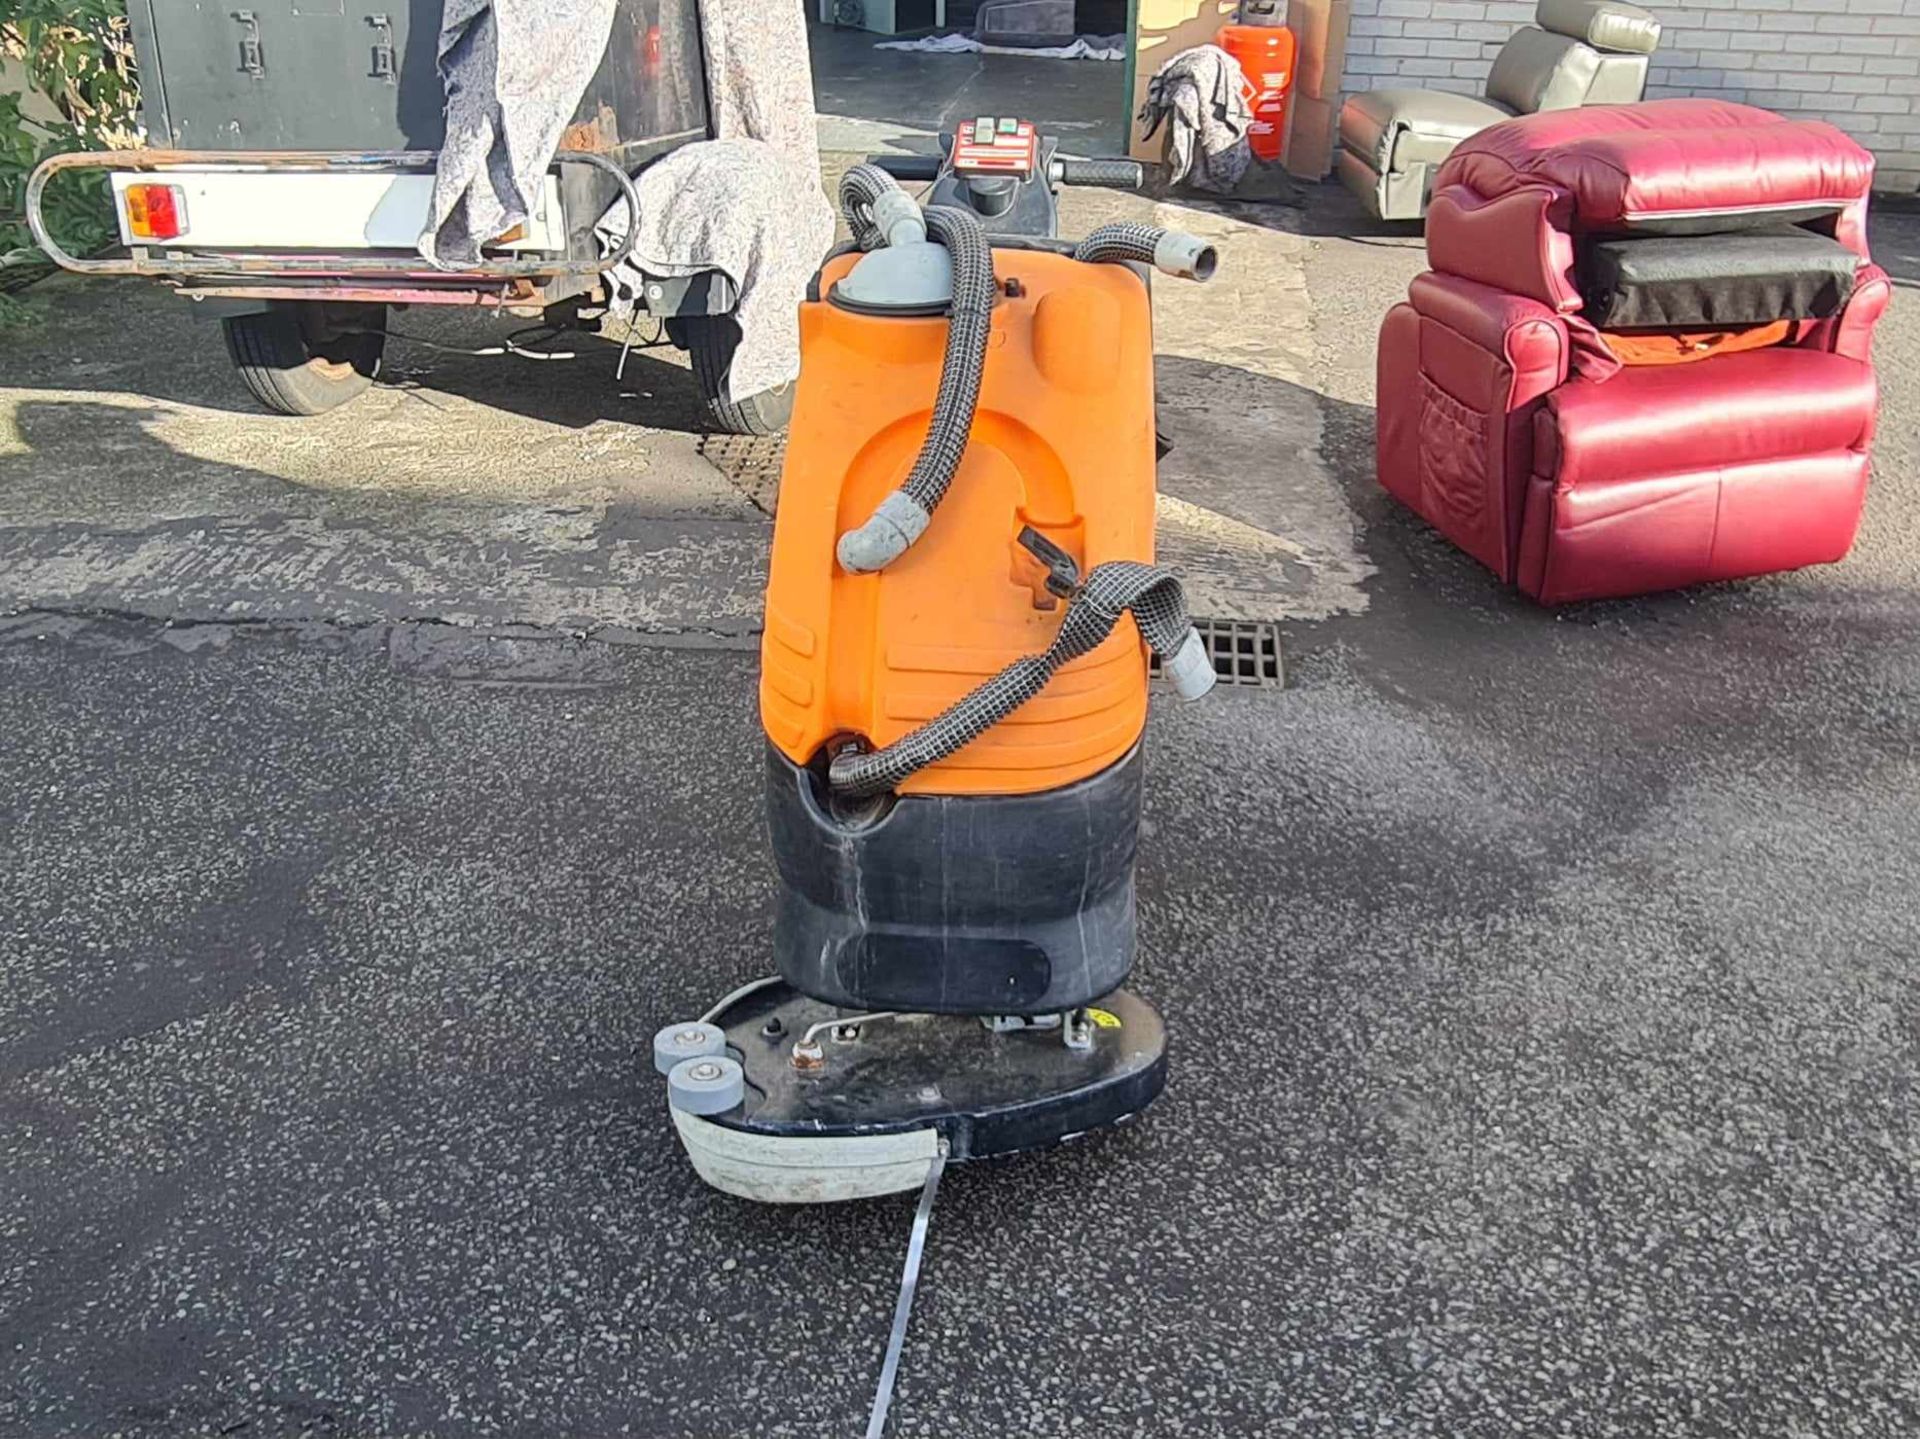 Professional Floor Cleaning Machine For Spares Or Repair - Image 2 of 4